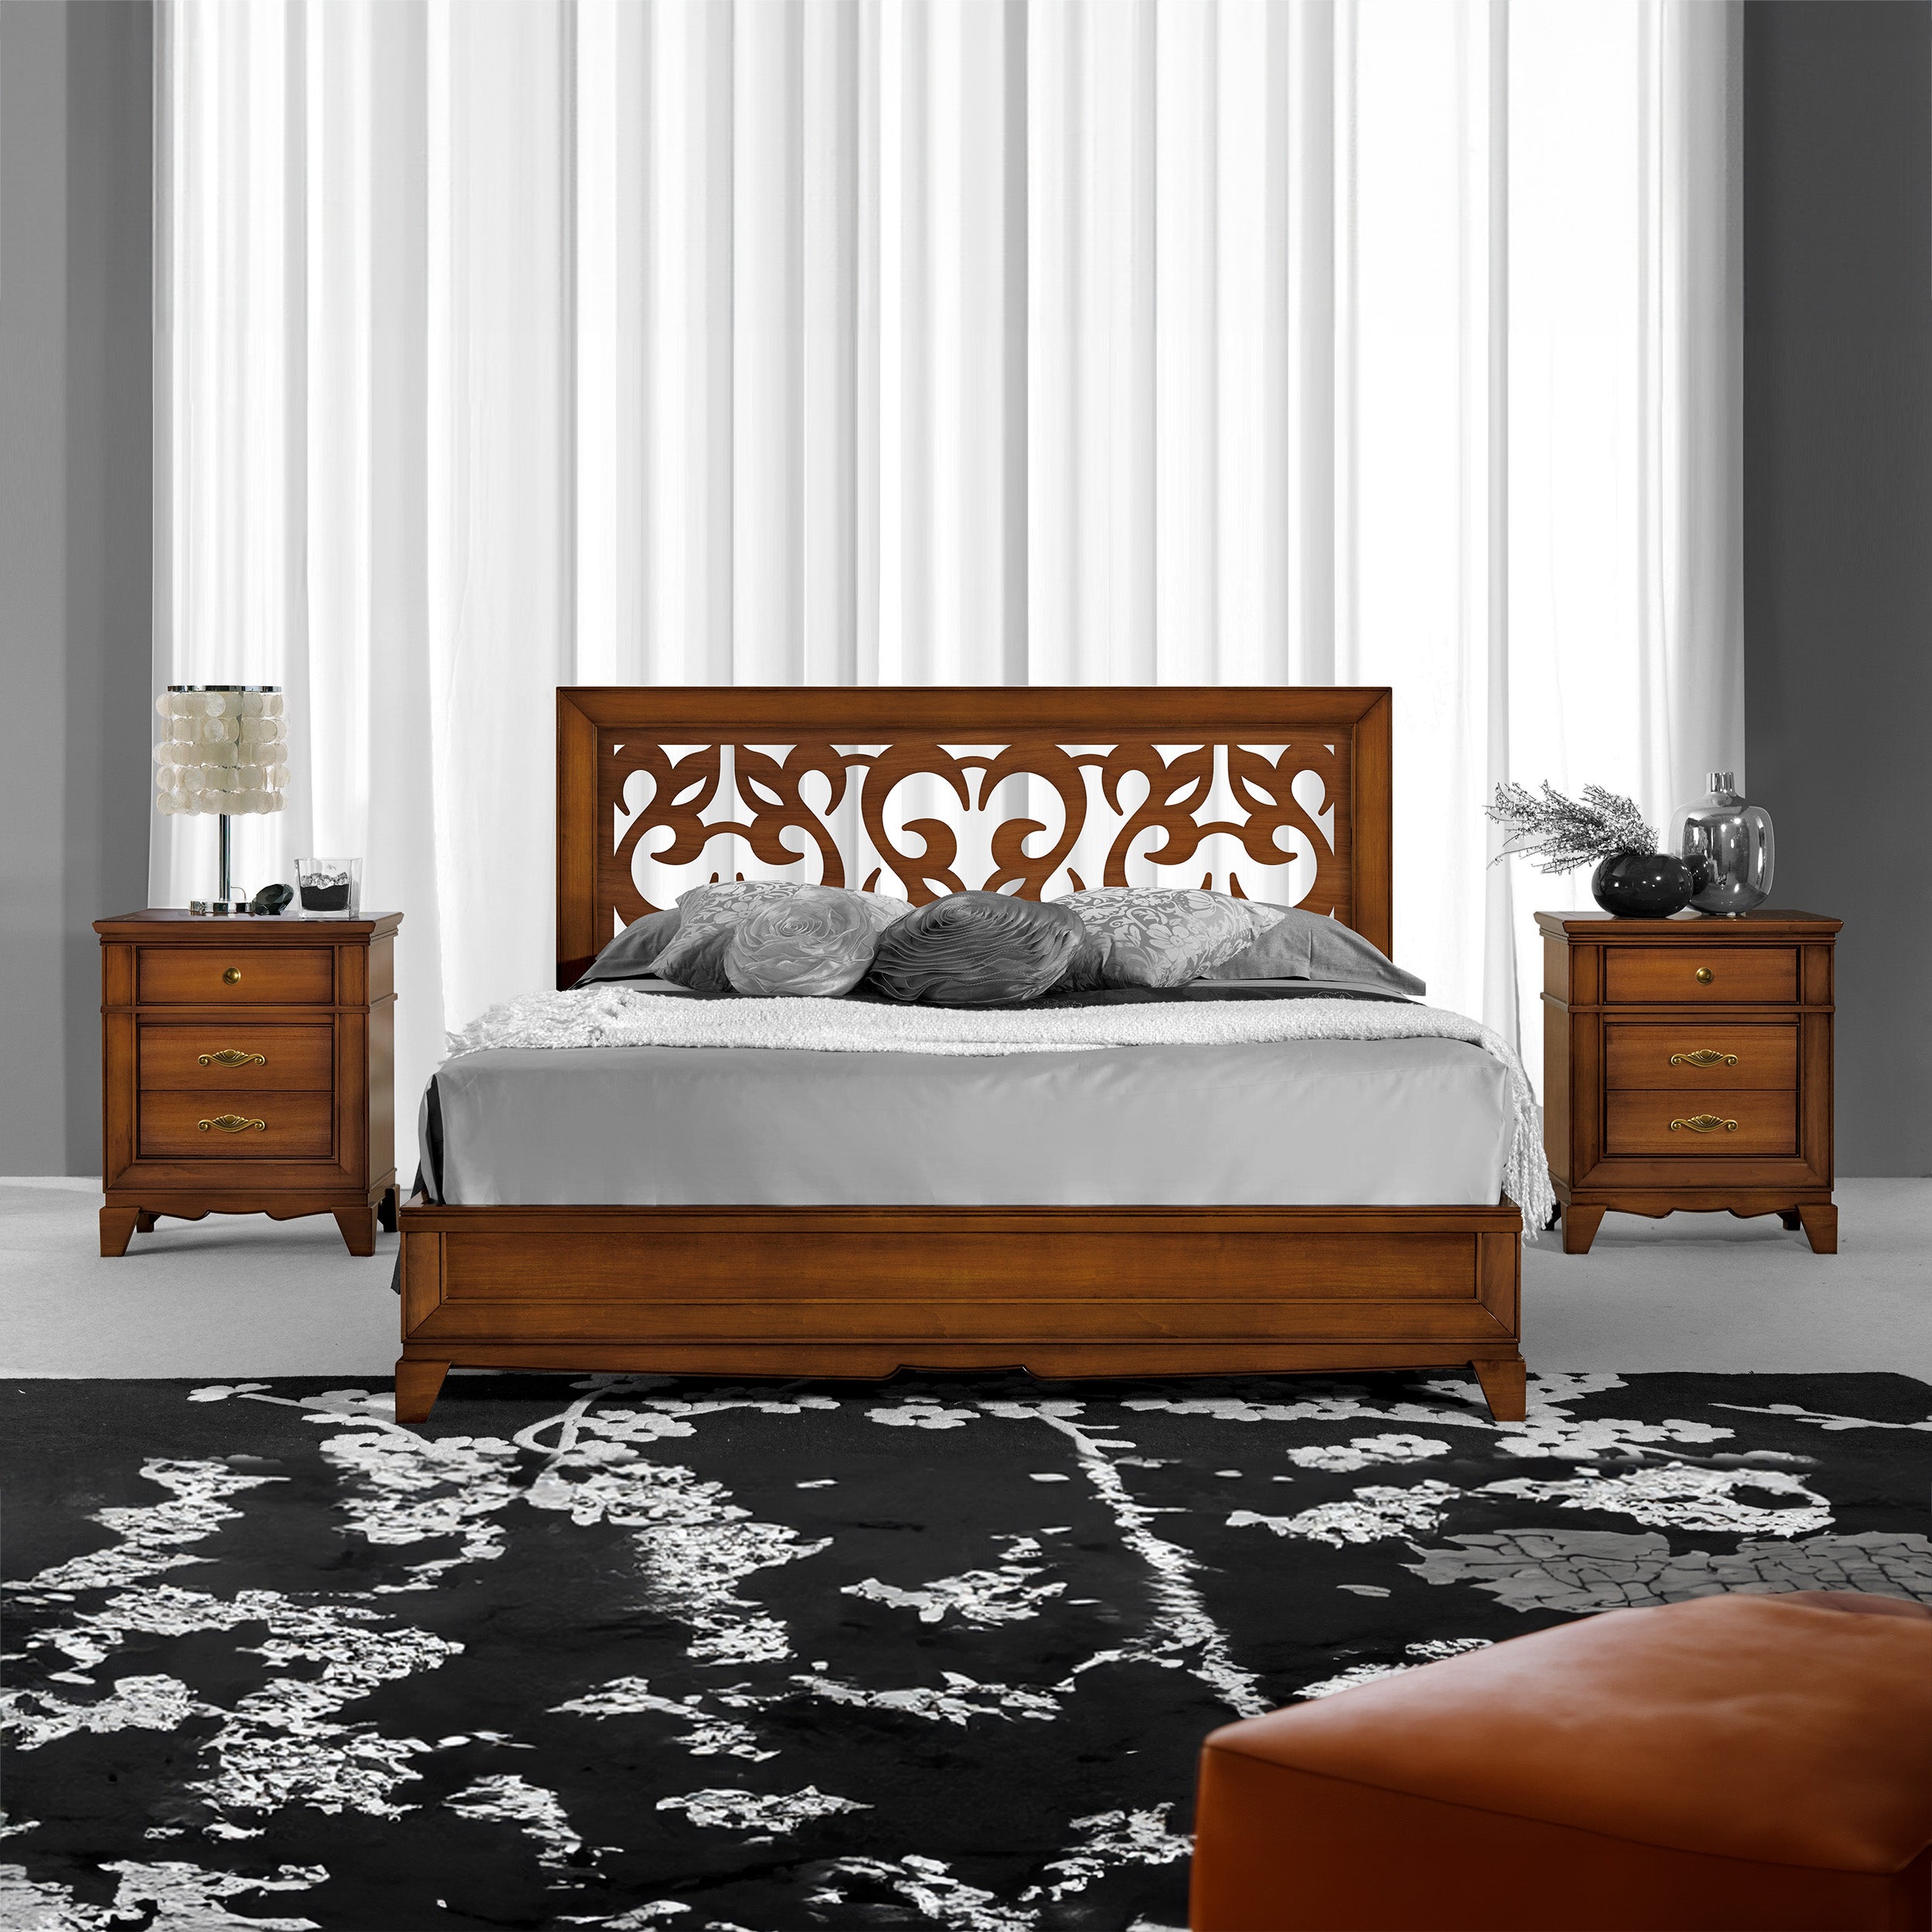 Classic double bed in wood with perforated headboard Arte d'Este Piombini collection